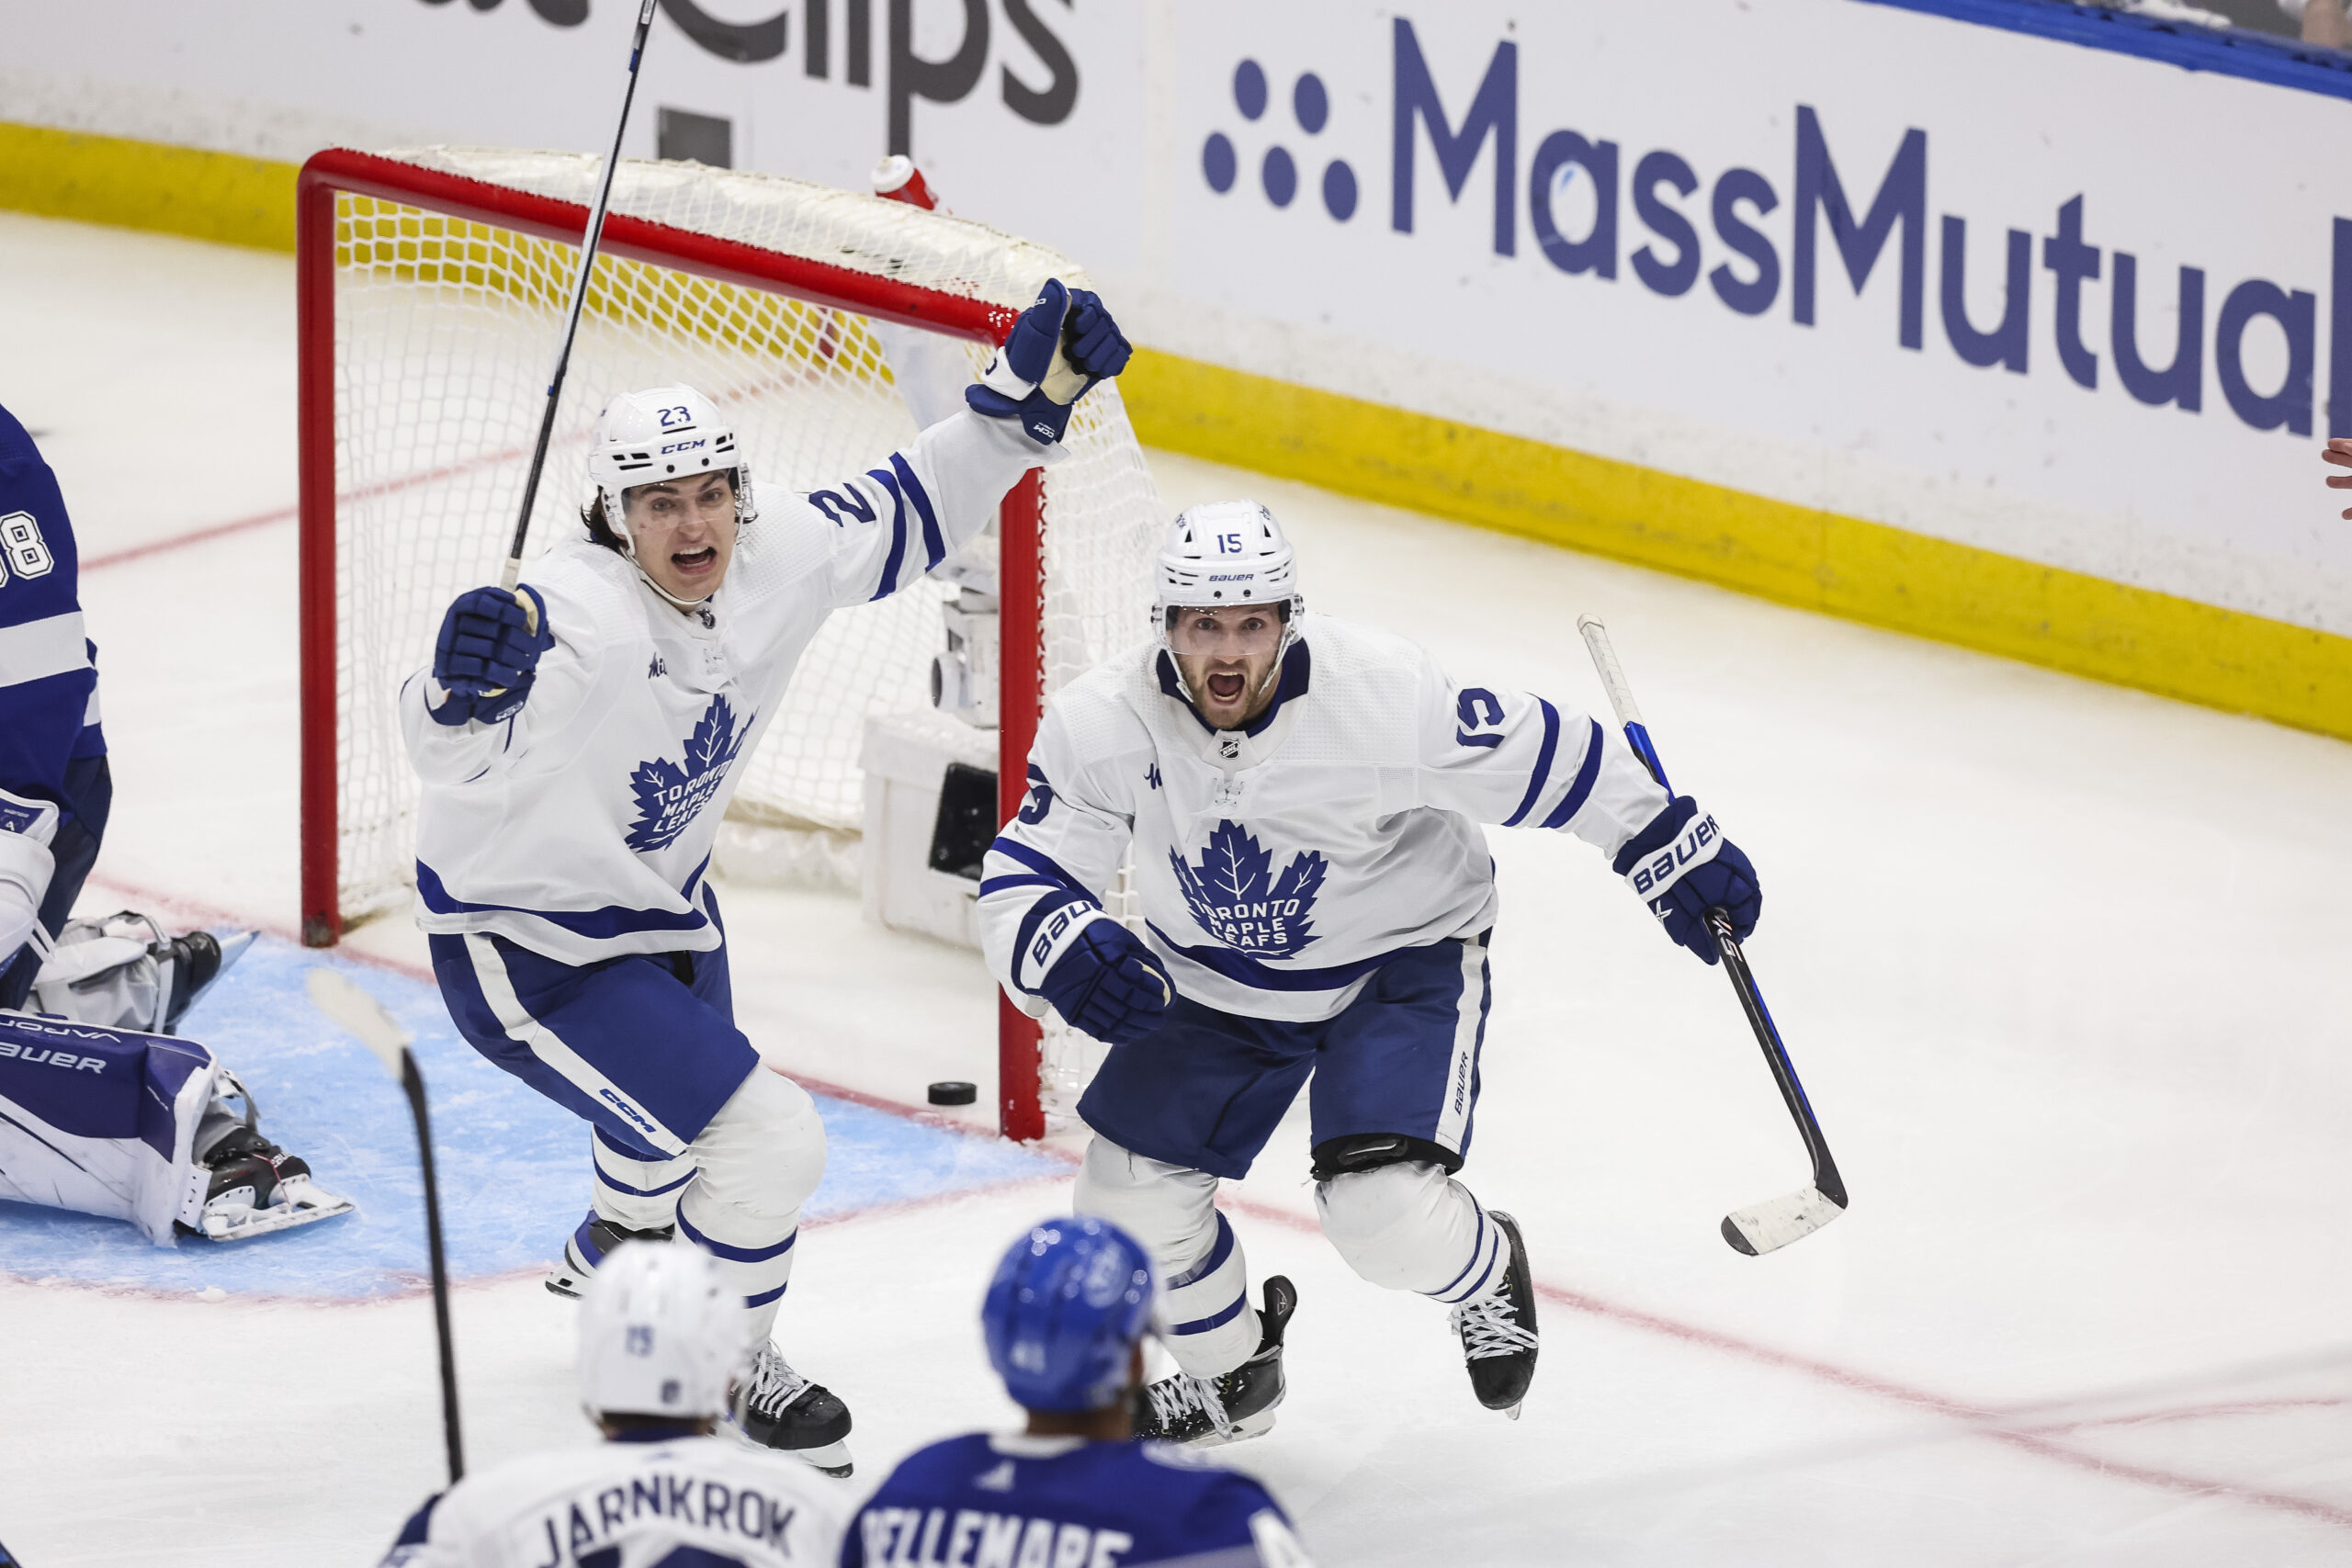 Maple Leafs vs. Lightning: Auston Matthews scores game winner to take 3-2  series lead - The Globe and Mail